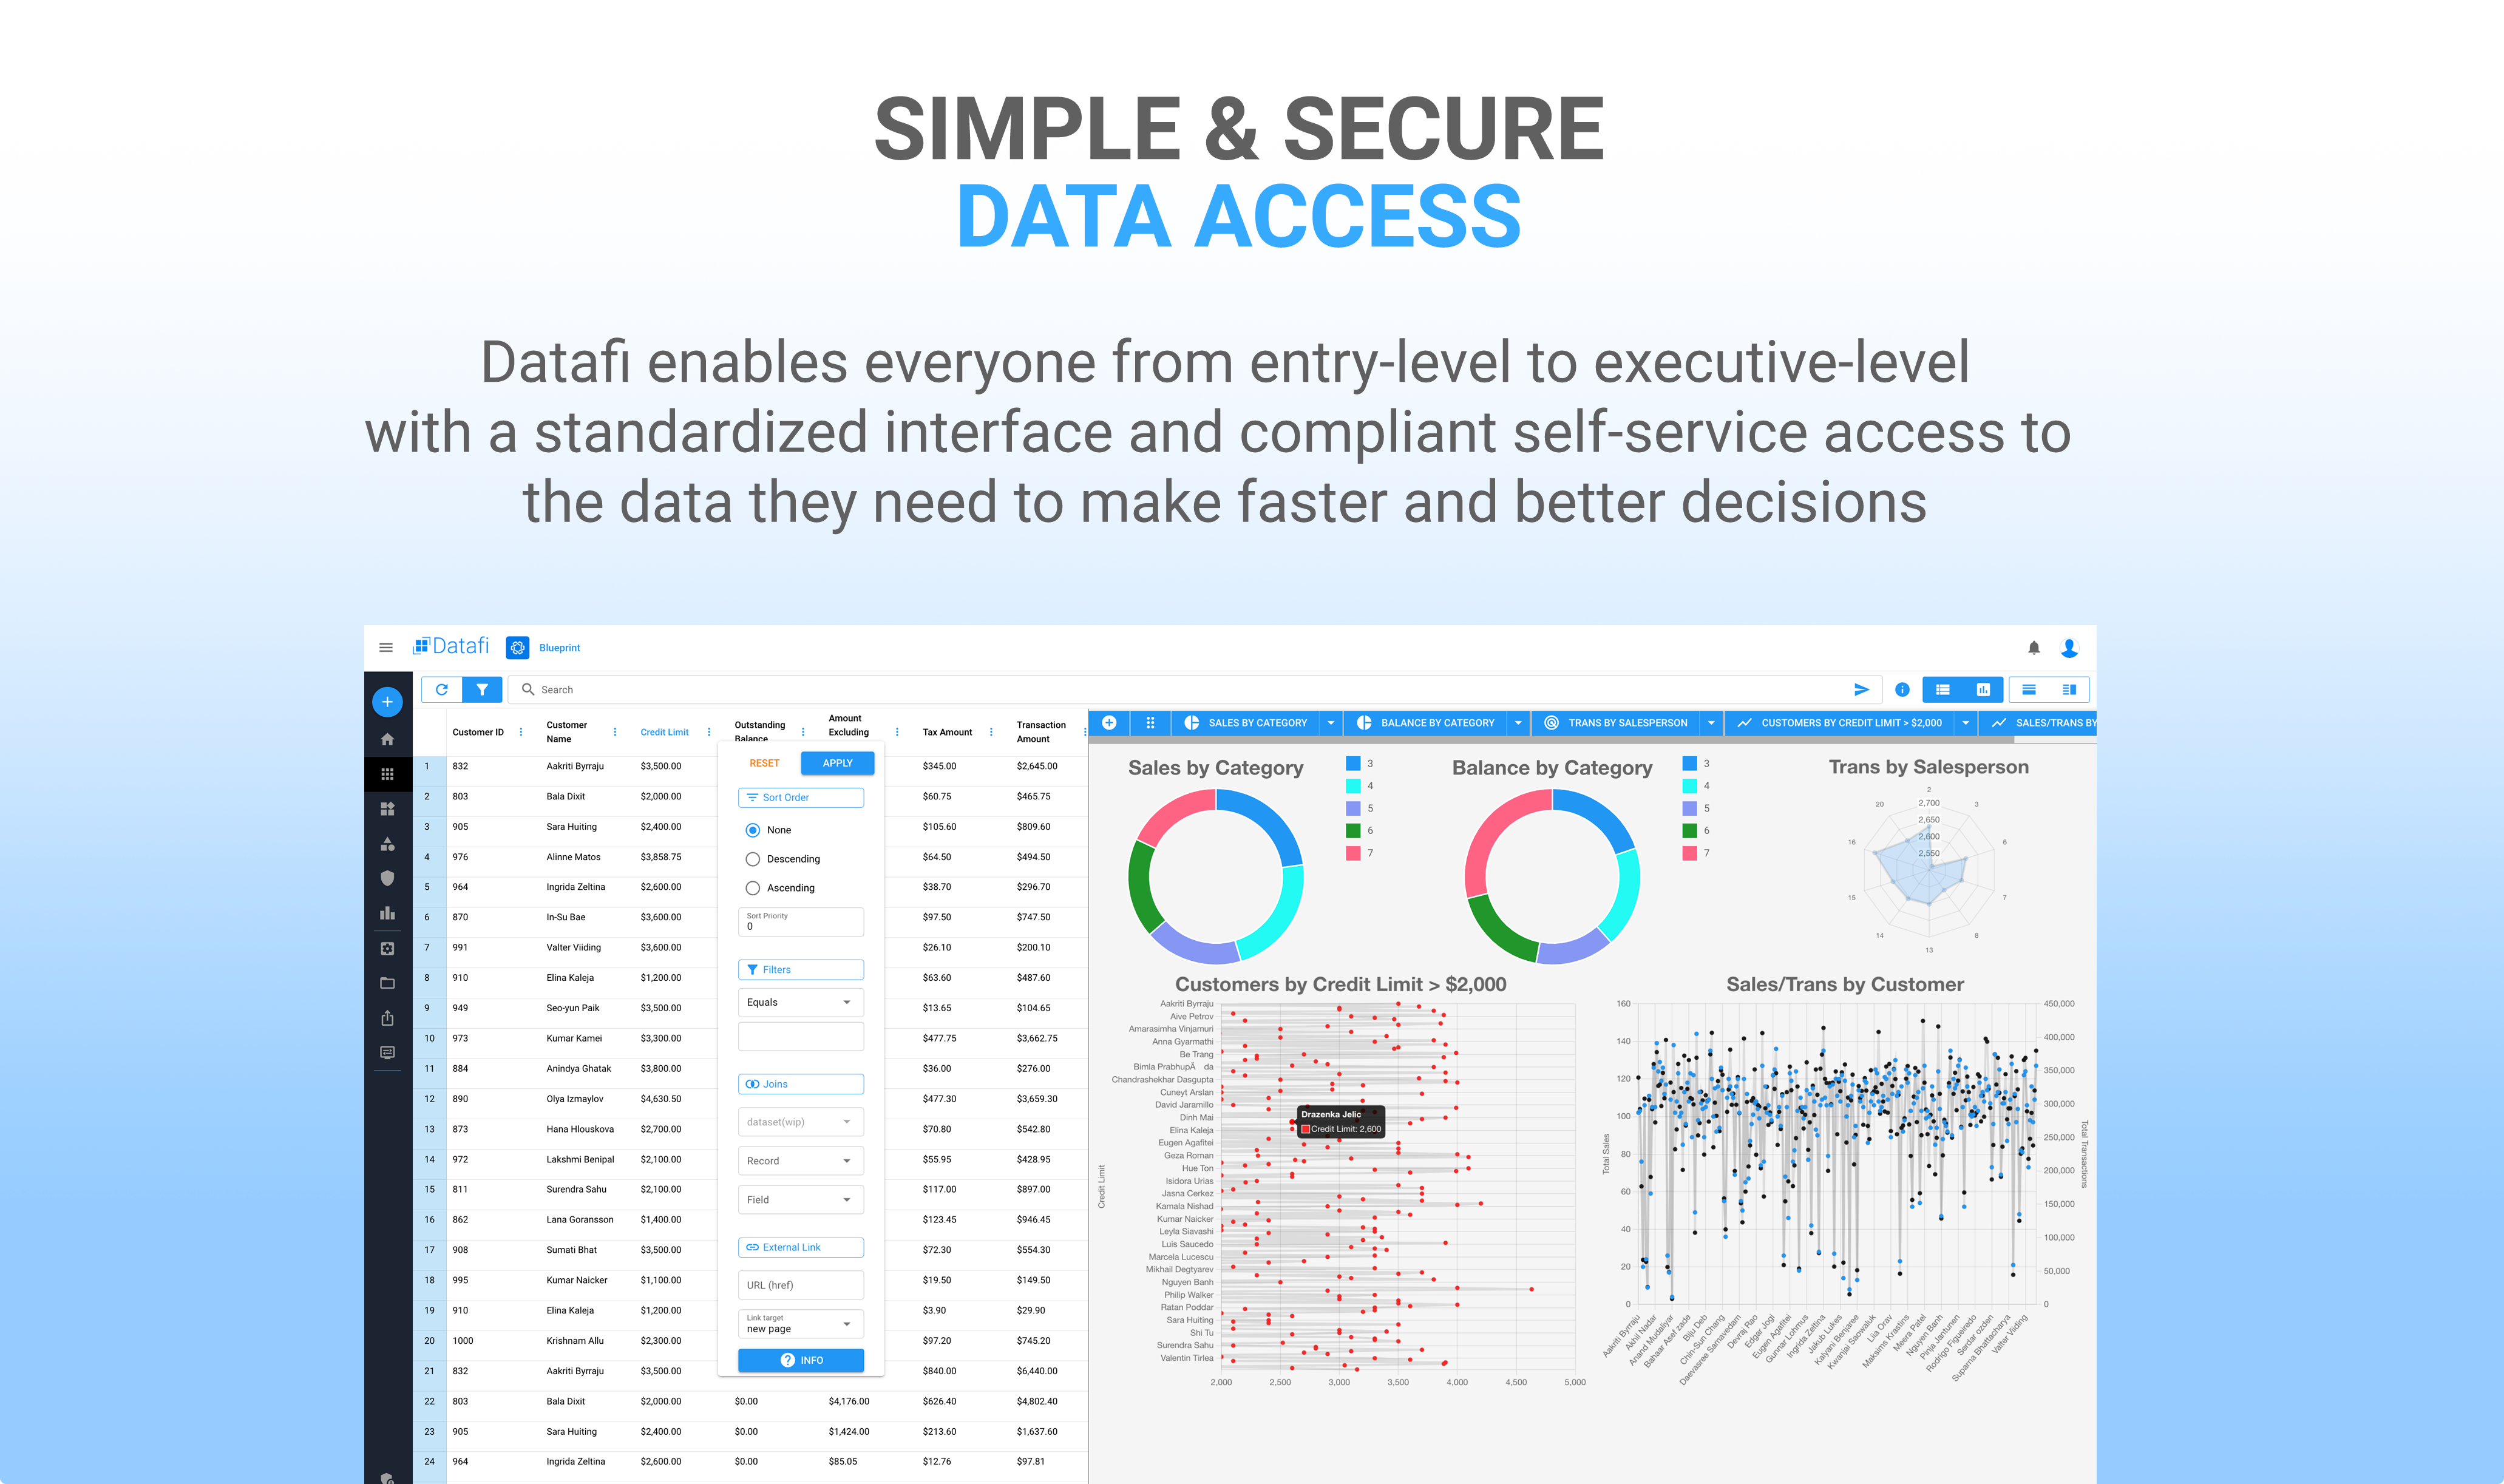 Datafi enables everyone from entry-level to executive-level with a standardized interface and compliant self-service access to the data they need to make faster and better decisions